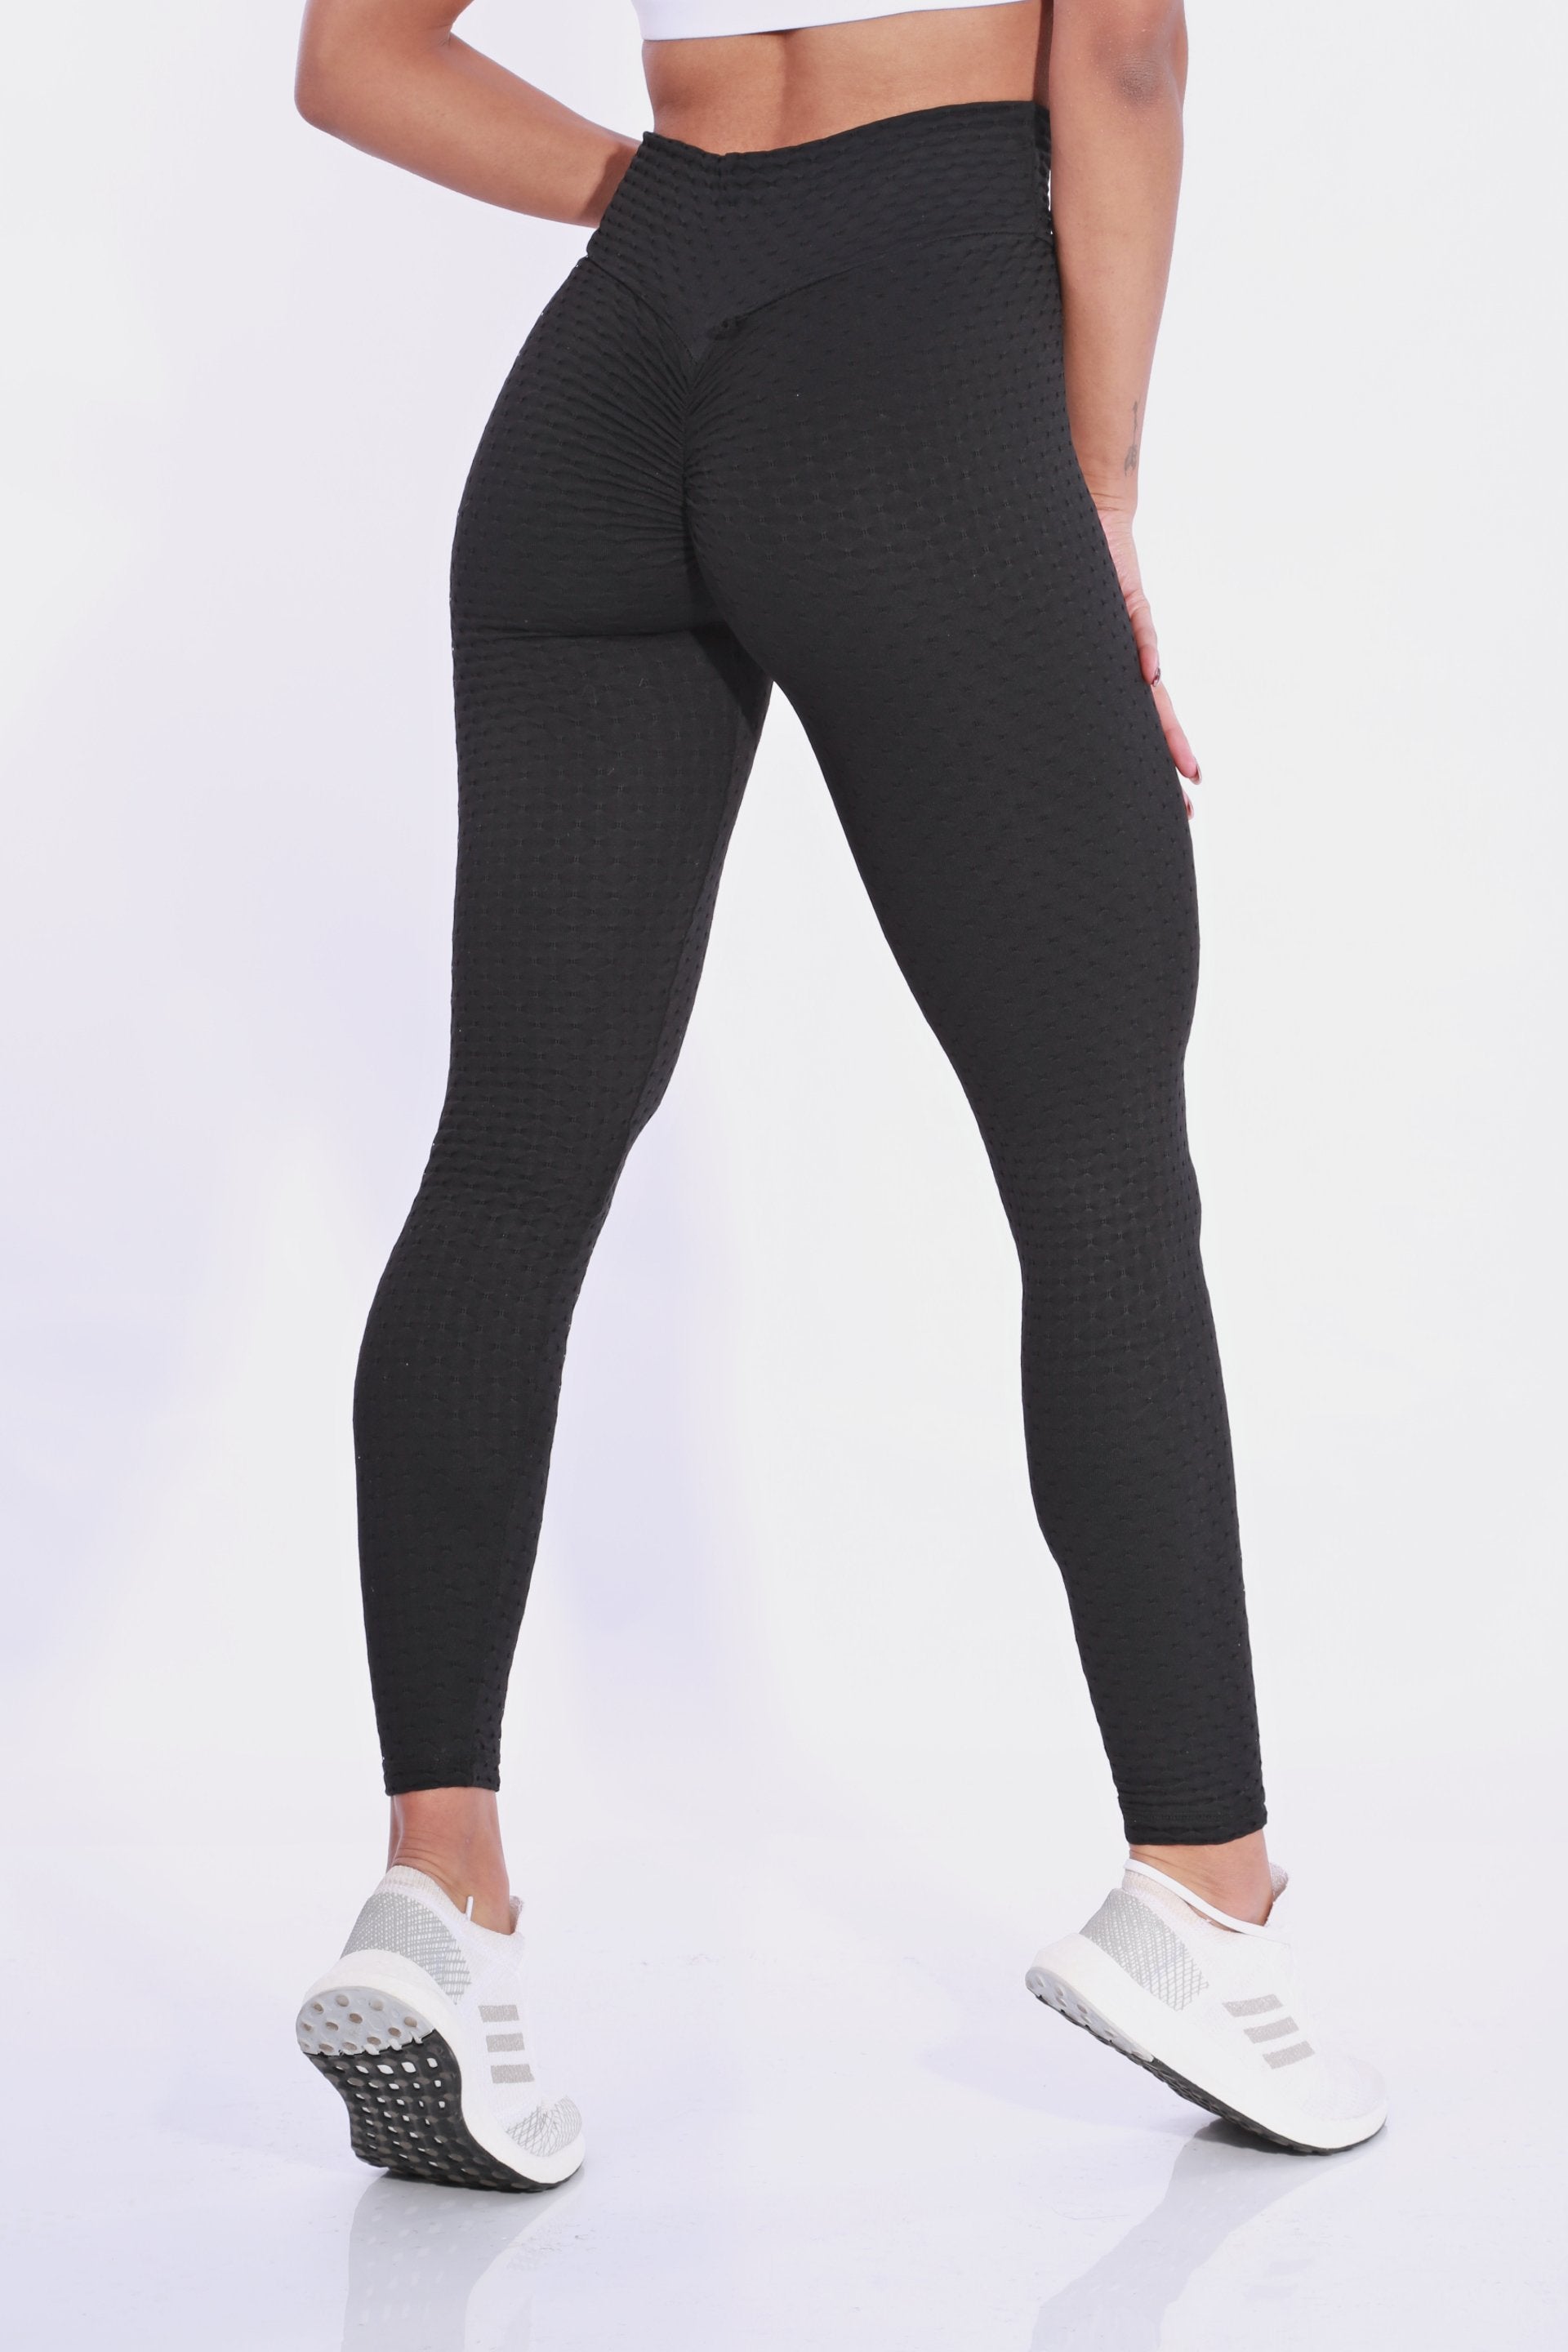 tititaja Women¡®s Textured Leggings Anti-Cellulite Compression Yoga Pants  High Waist Booty Leggings Running Tights Jogging Leggings (Color : White,  Size : Small) : Buy Online at Best Price in KSA - Souq